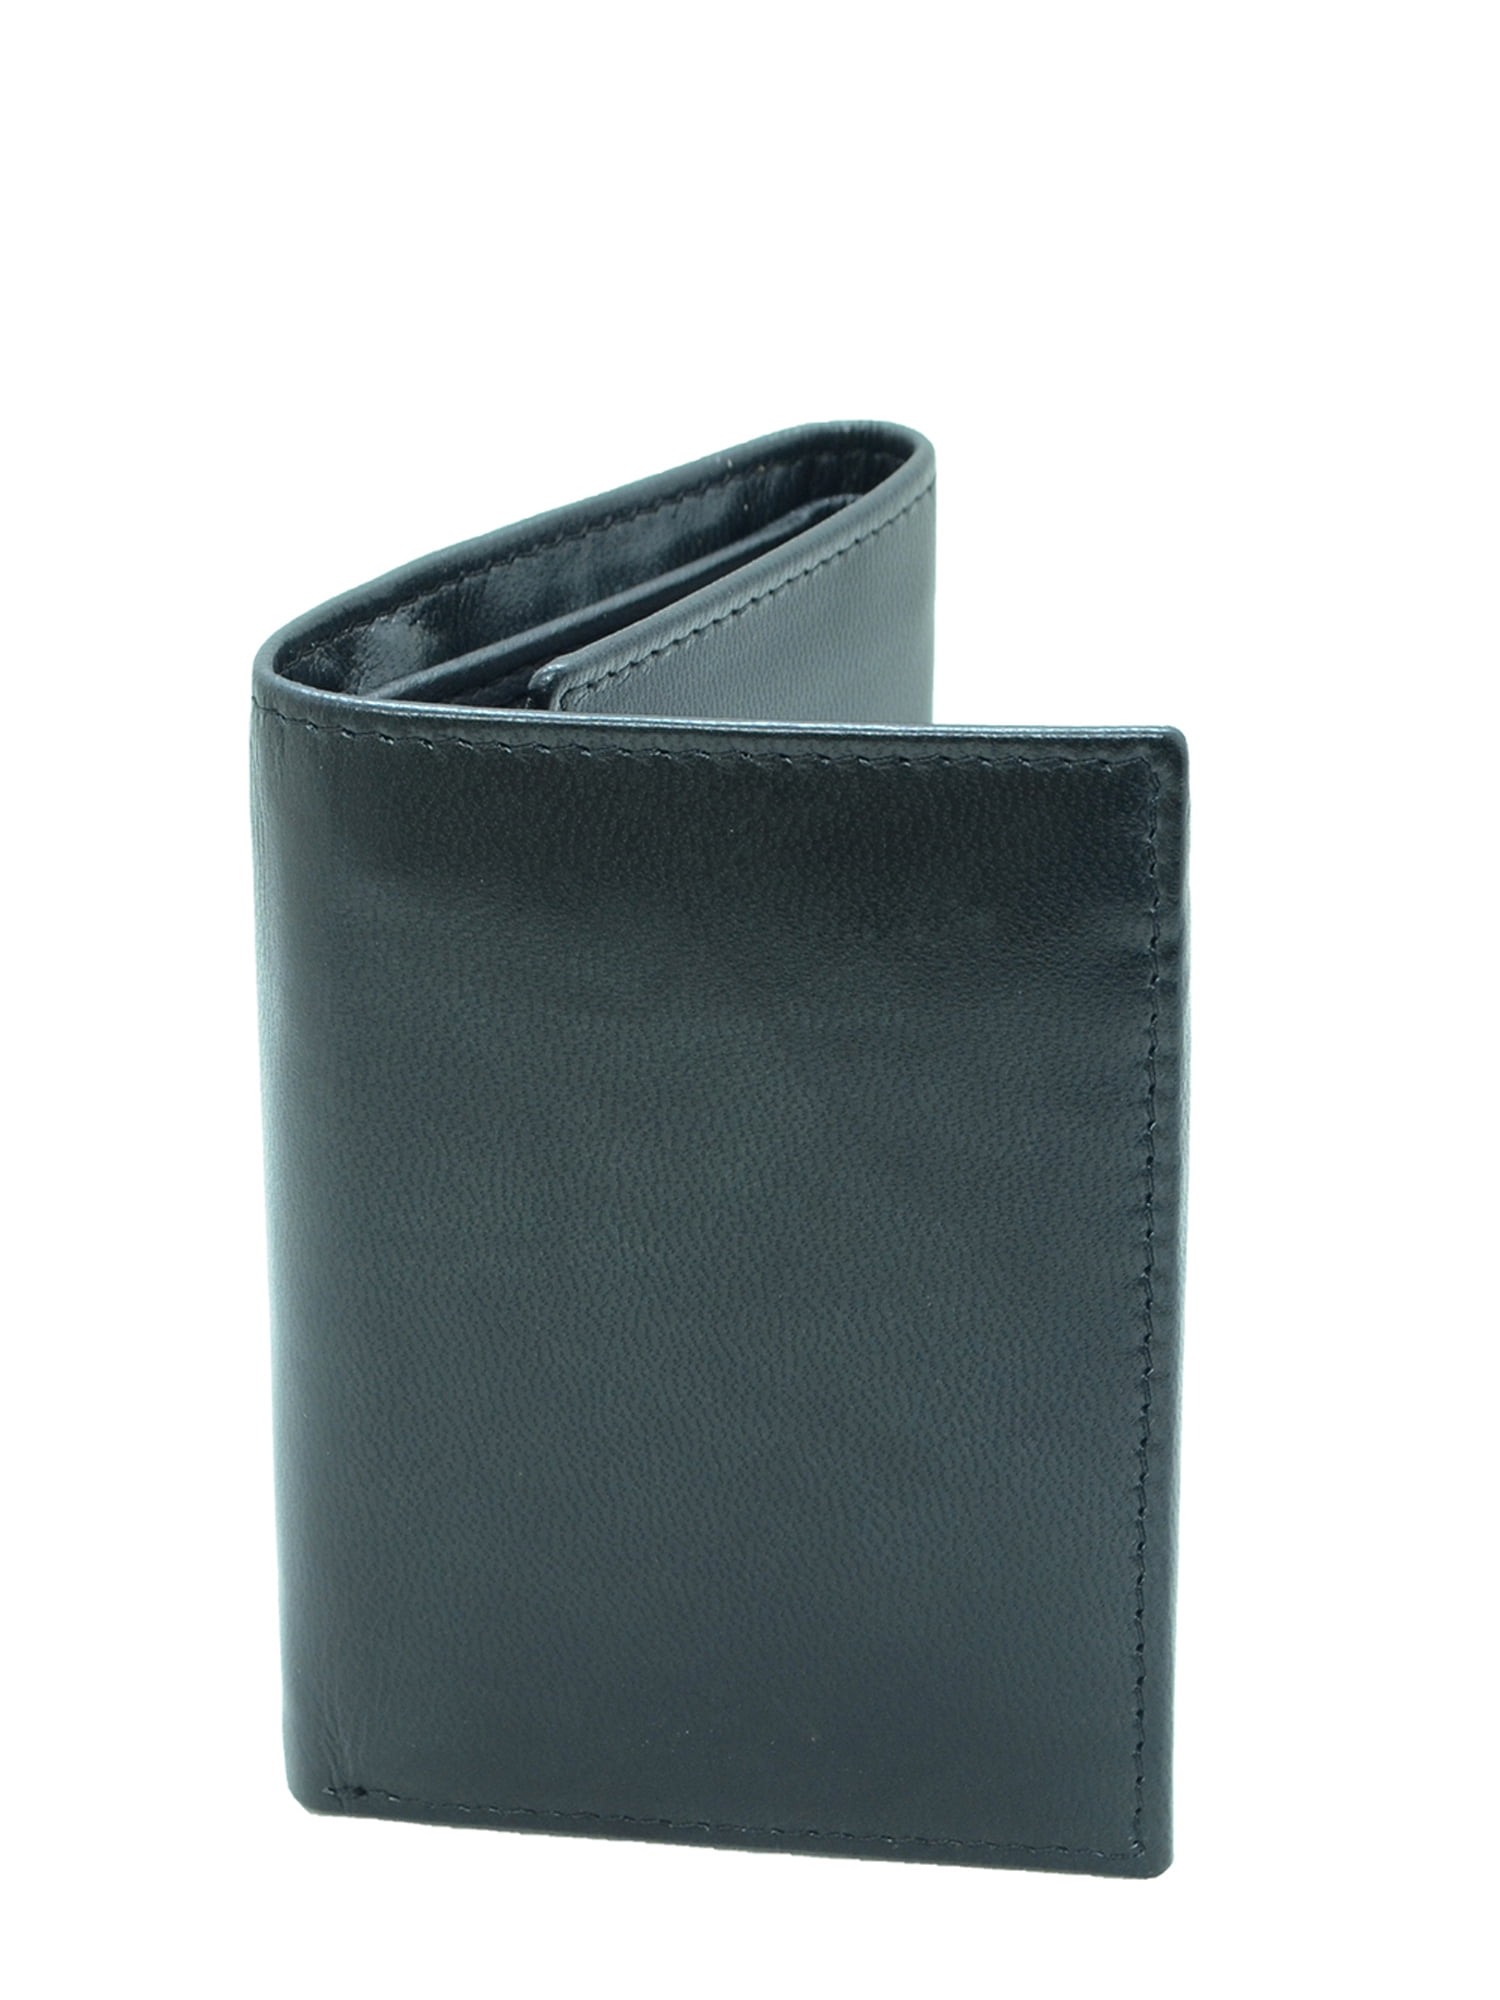 George Milled Bifold with Wing Wallet - Sepia - 1 Each